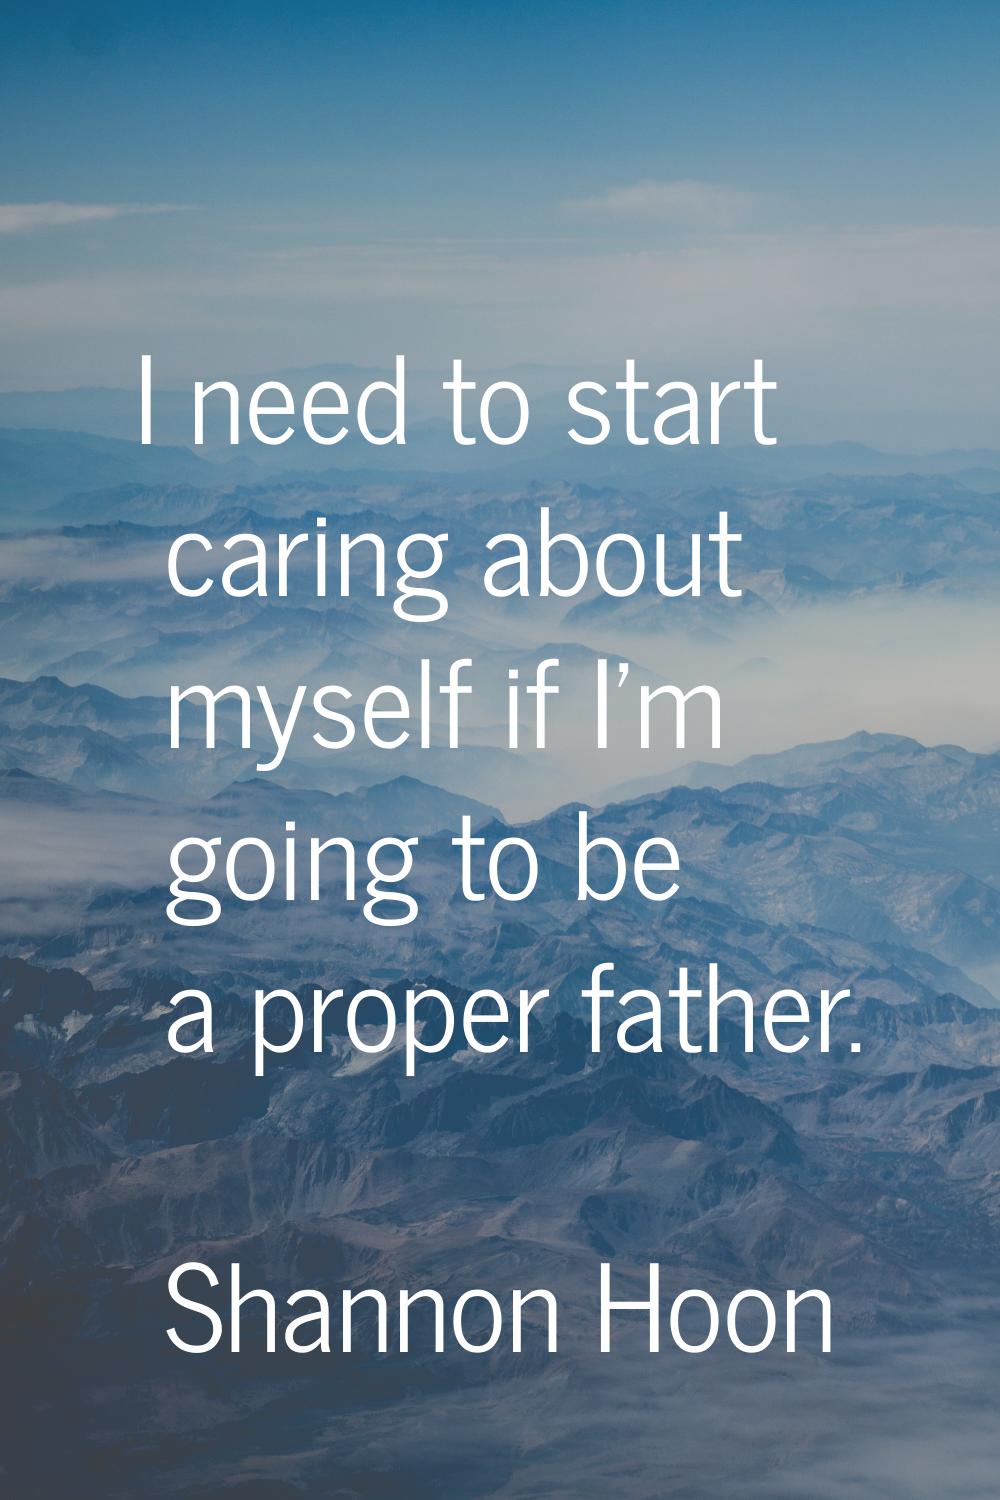 I need to start caring about myself if I'm going to be a proper father.